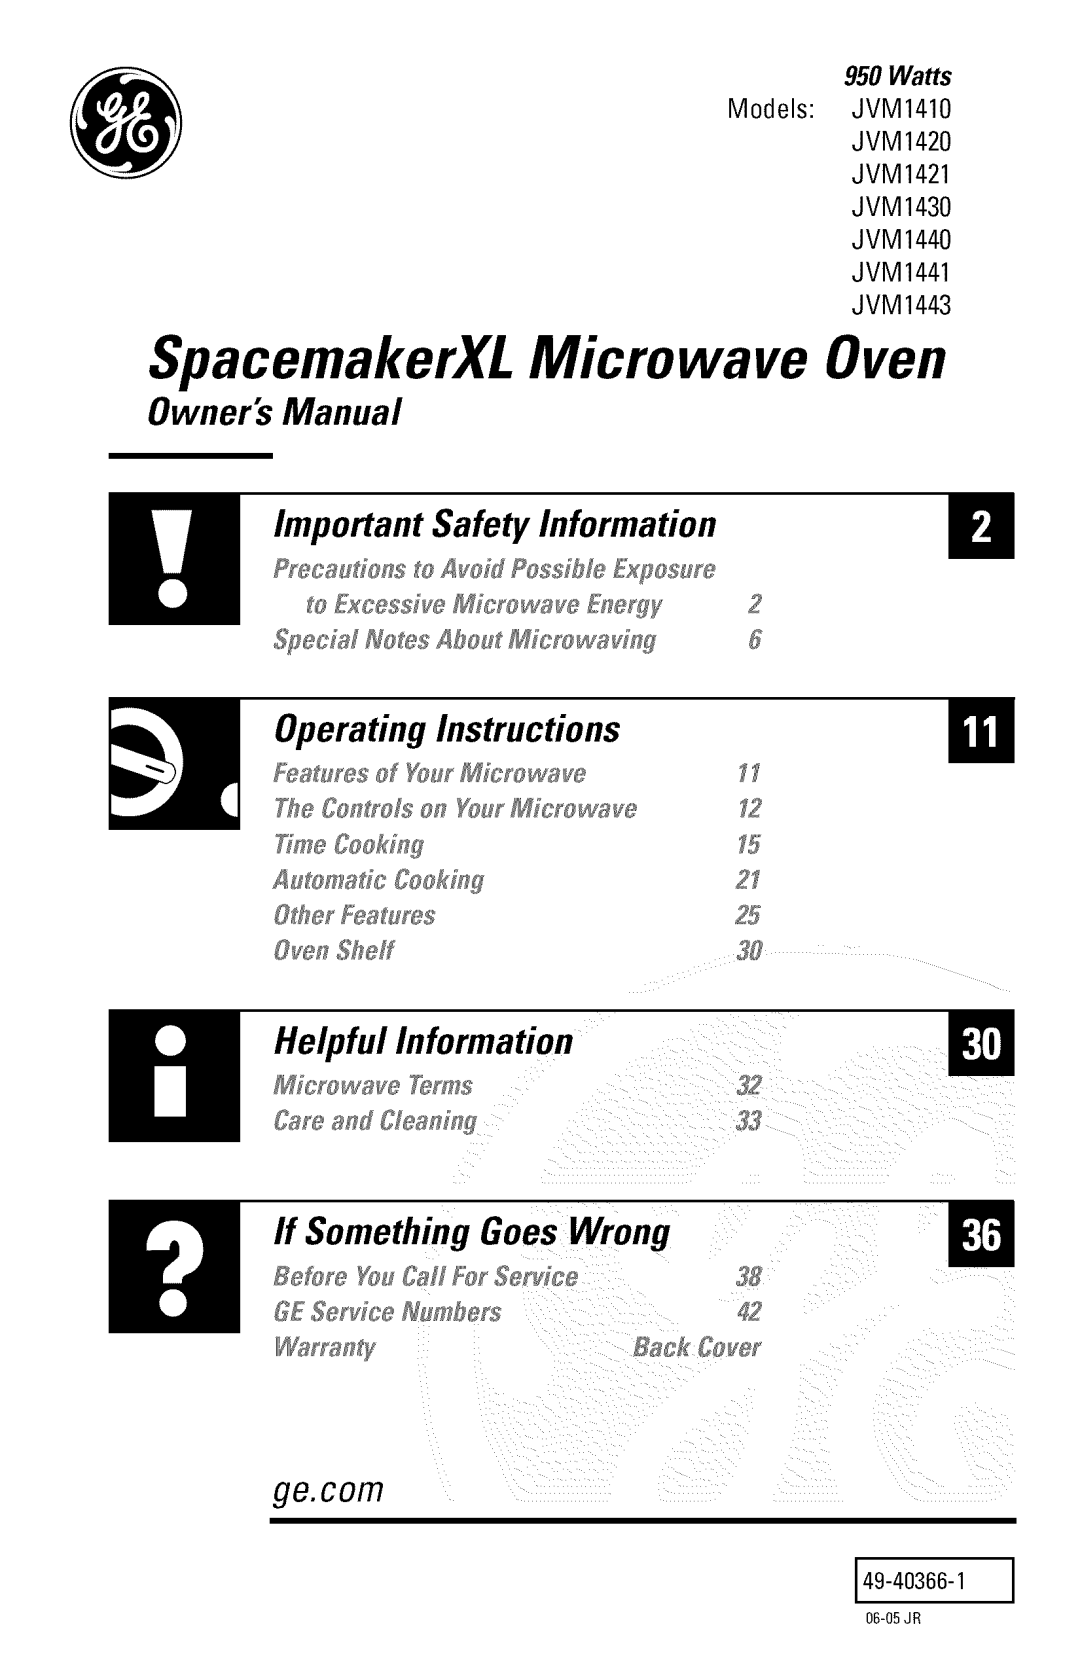 GE JVM1441 owner manual Operating Instructions, Helpful Information, If Something Goes Wrong, SpacemakerXL Microwave Oven 